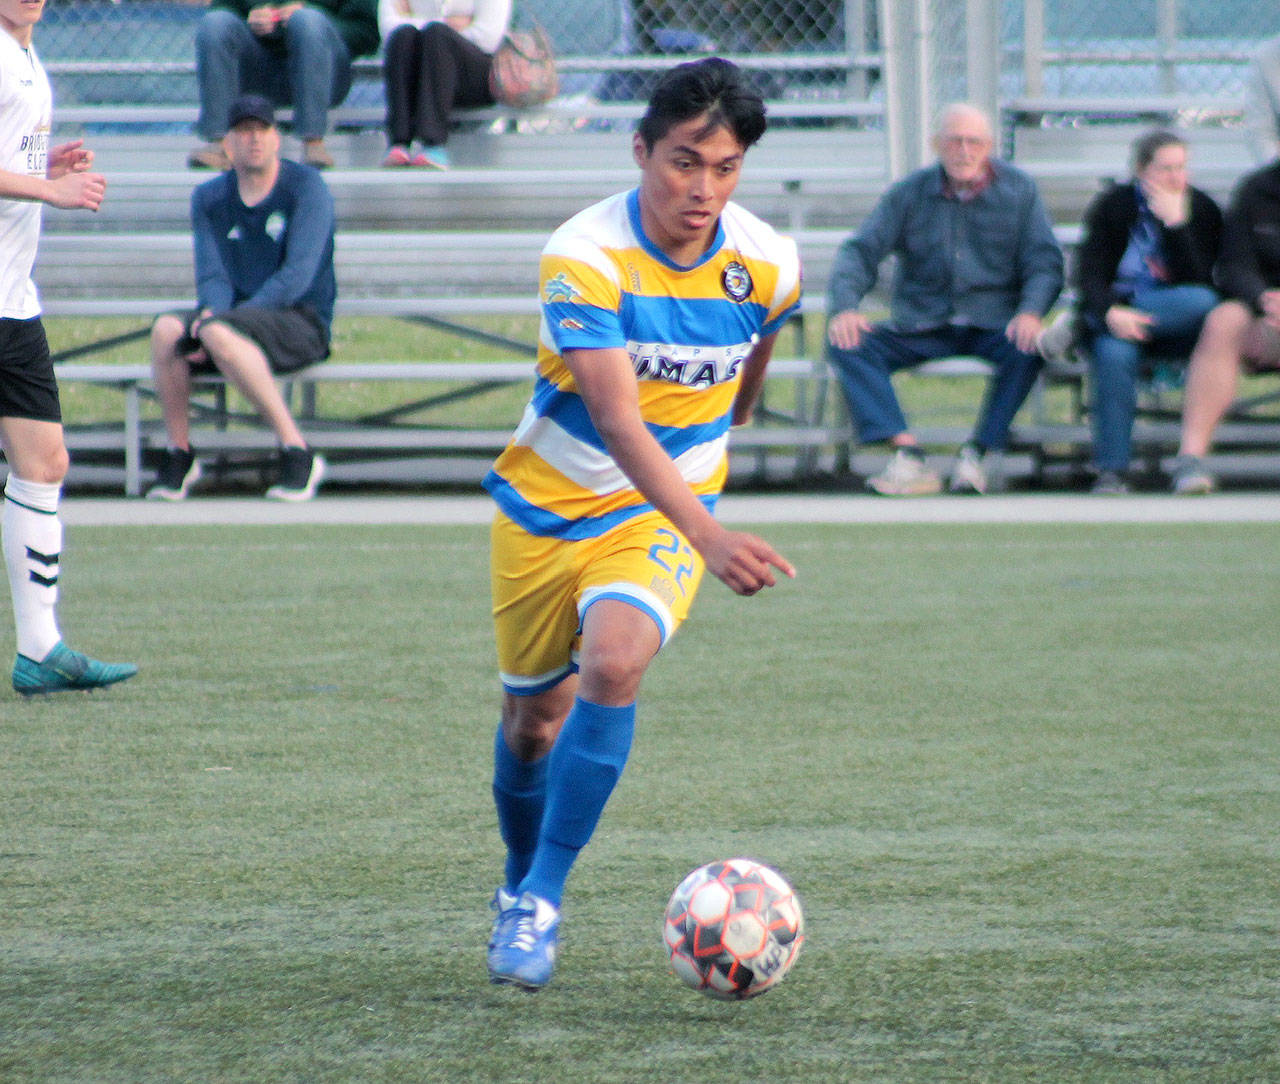 Uriel Herrera dribbles through the midfield during the Pumas’ 2-0 victory over PDX FC. (Mark Krulish/Kitsap News Group)